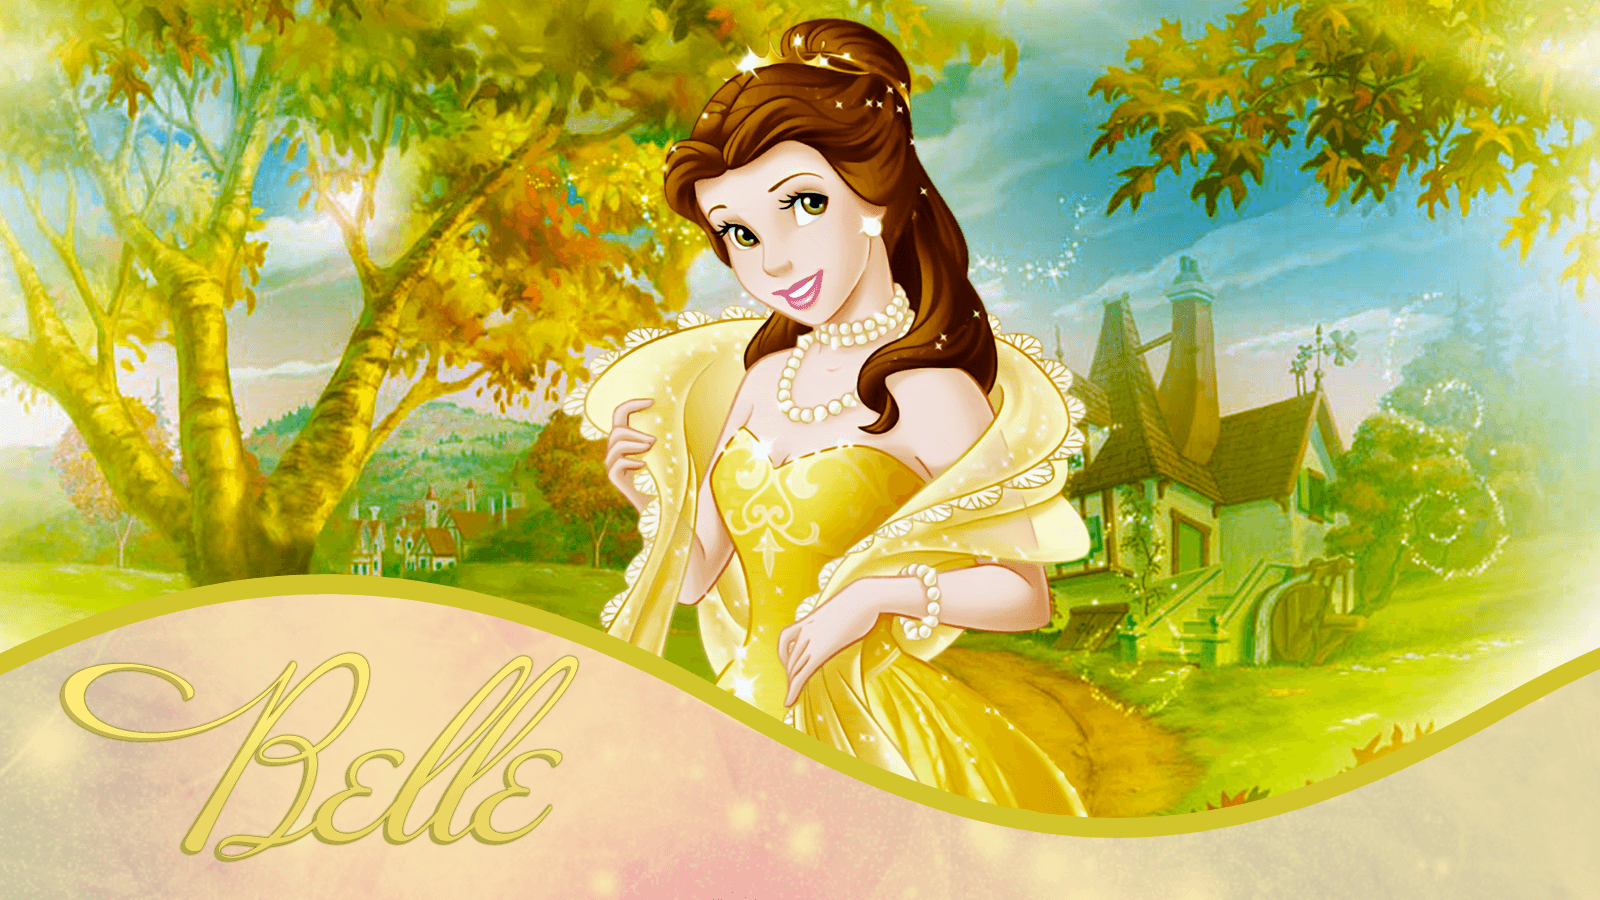 rincess Belle Wallpaper 2011 by PriMagnus2008. Beauty and the Beast